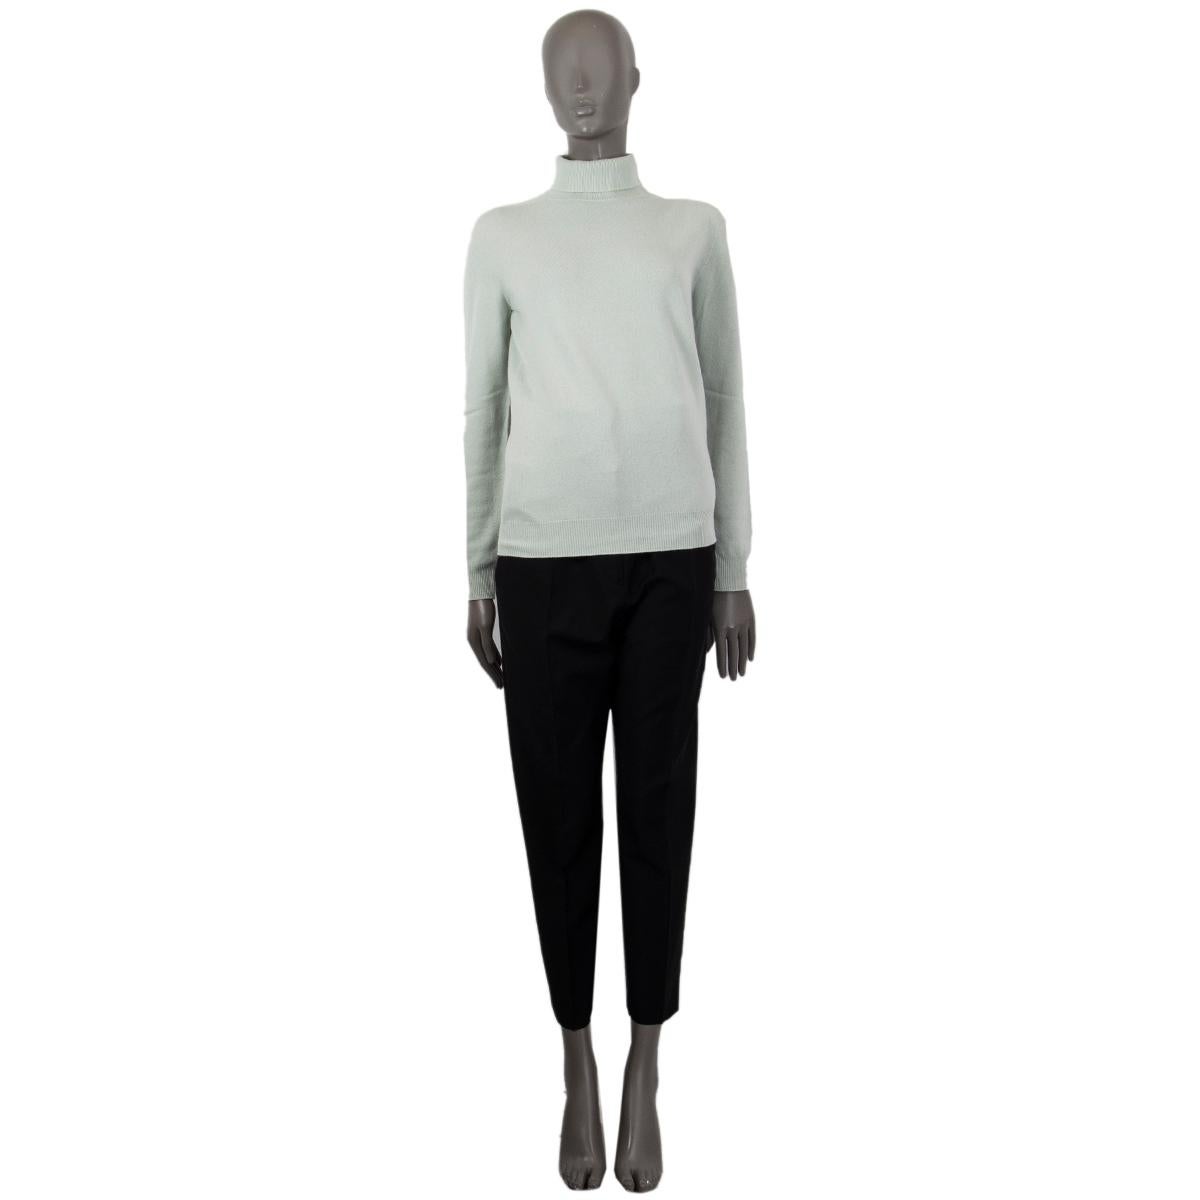 100% authentic Jil Sander fine knit turtleneck in mint missing tag (cashmere) with ribbed trim, long sleeves and casual fit, mid-weight to slip on. Unlined. Has been worn and is in excellent condition. 

Measurements
Tag Size	Missing Size